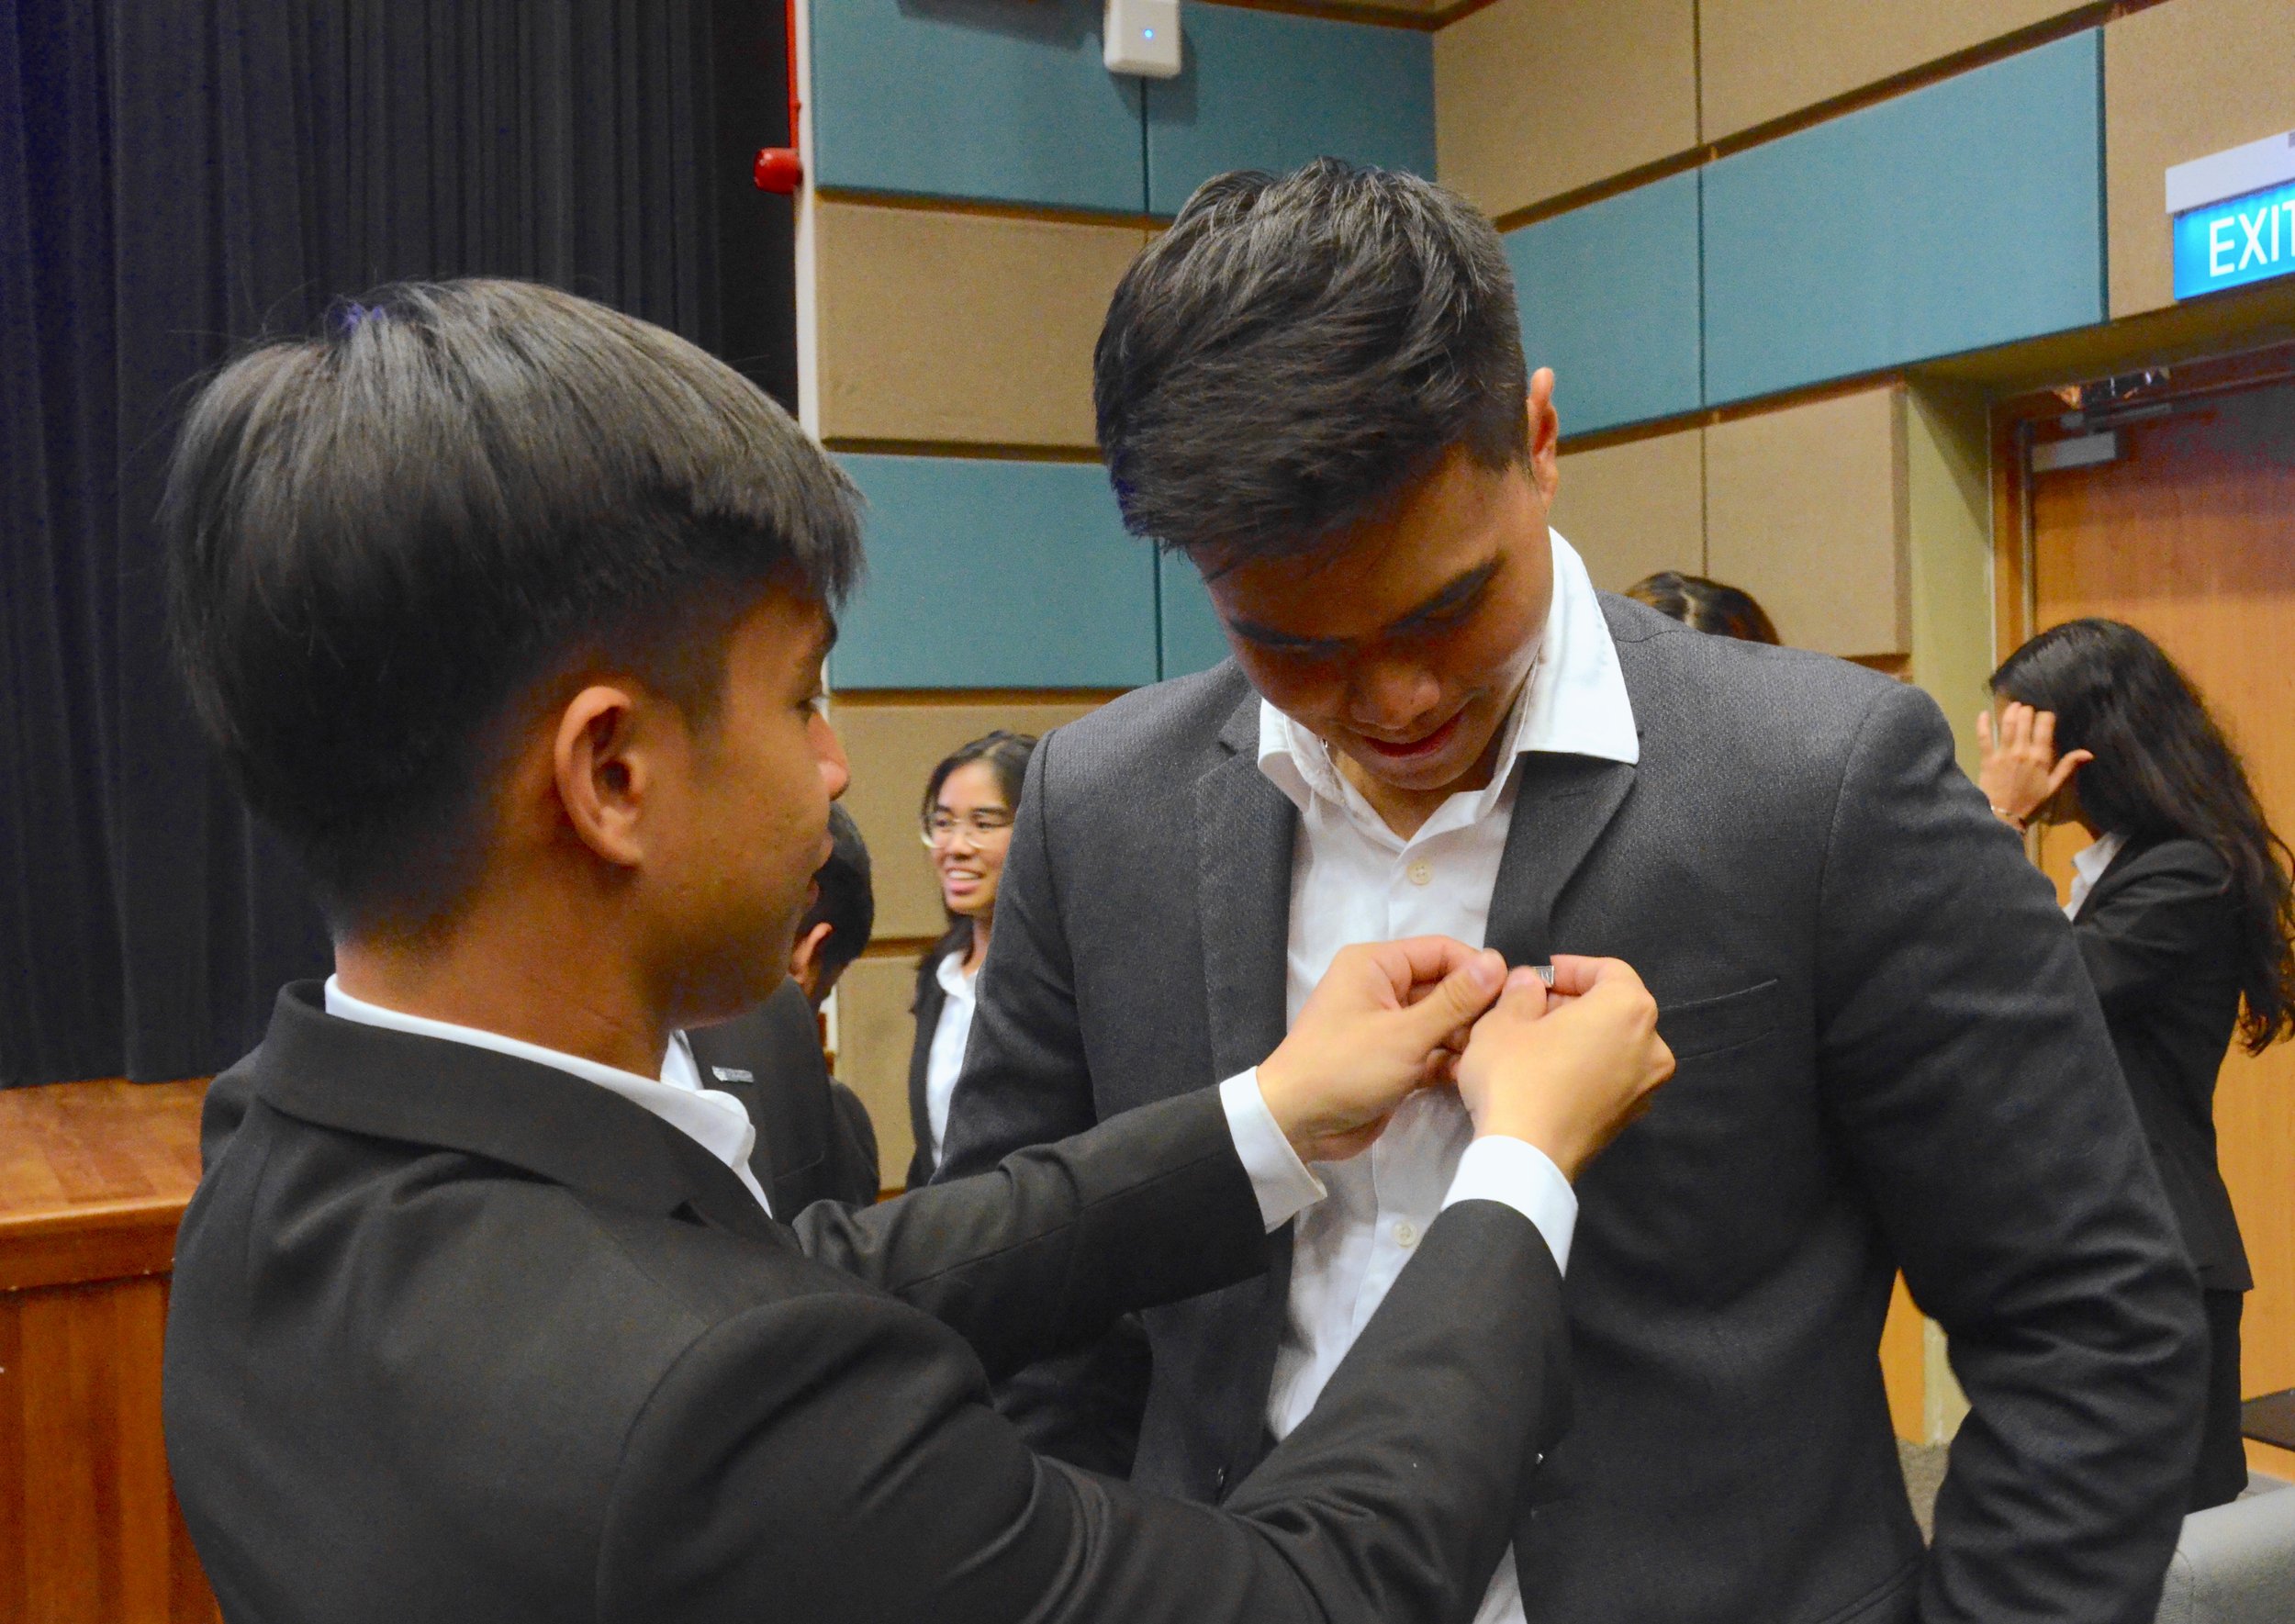 An OGL pinning the NUS Law badge on his freshman